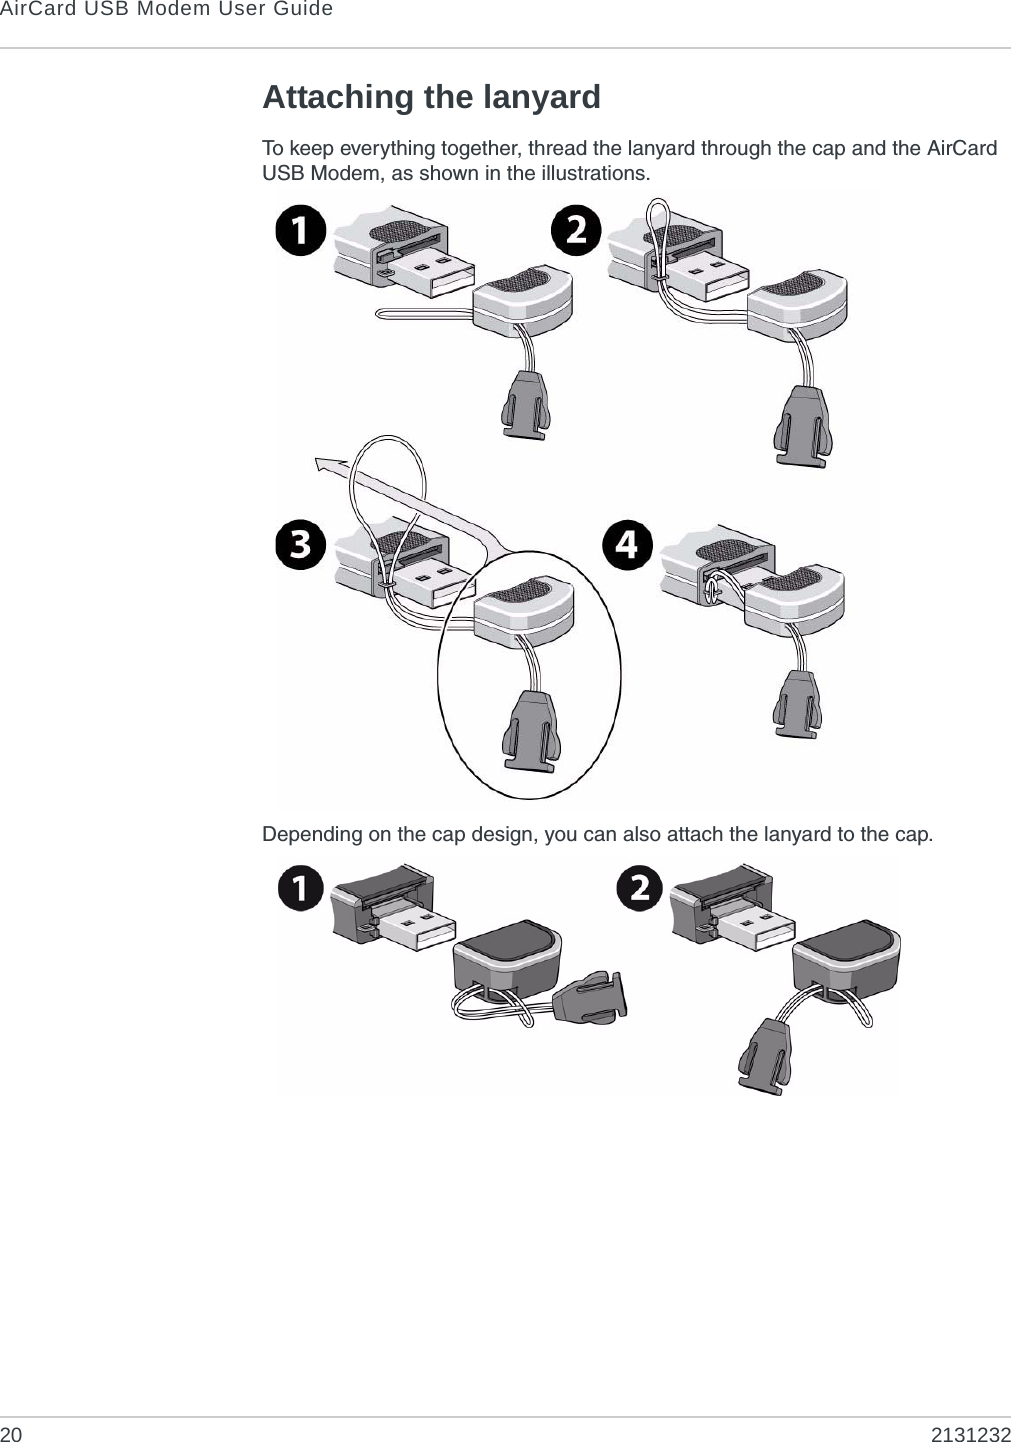 AirCard USB Modem User Guide20 2131232Attaching the lanyardTo keep everything together, thread the lanyard through the cap and the AirCard USB Modem, as shown in the illustrations. Depending on the cap design, you can also attach the lanyard to the cap.